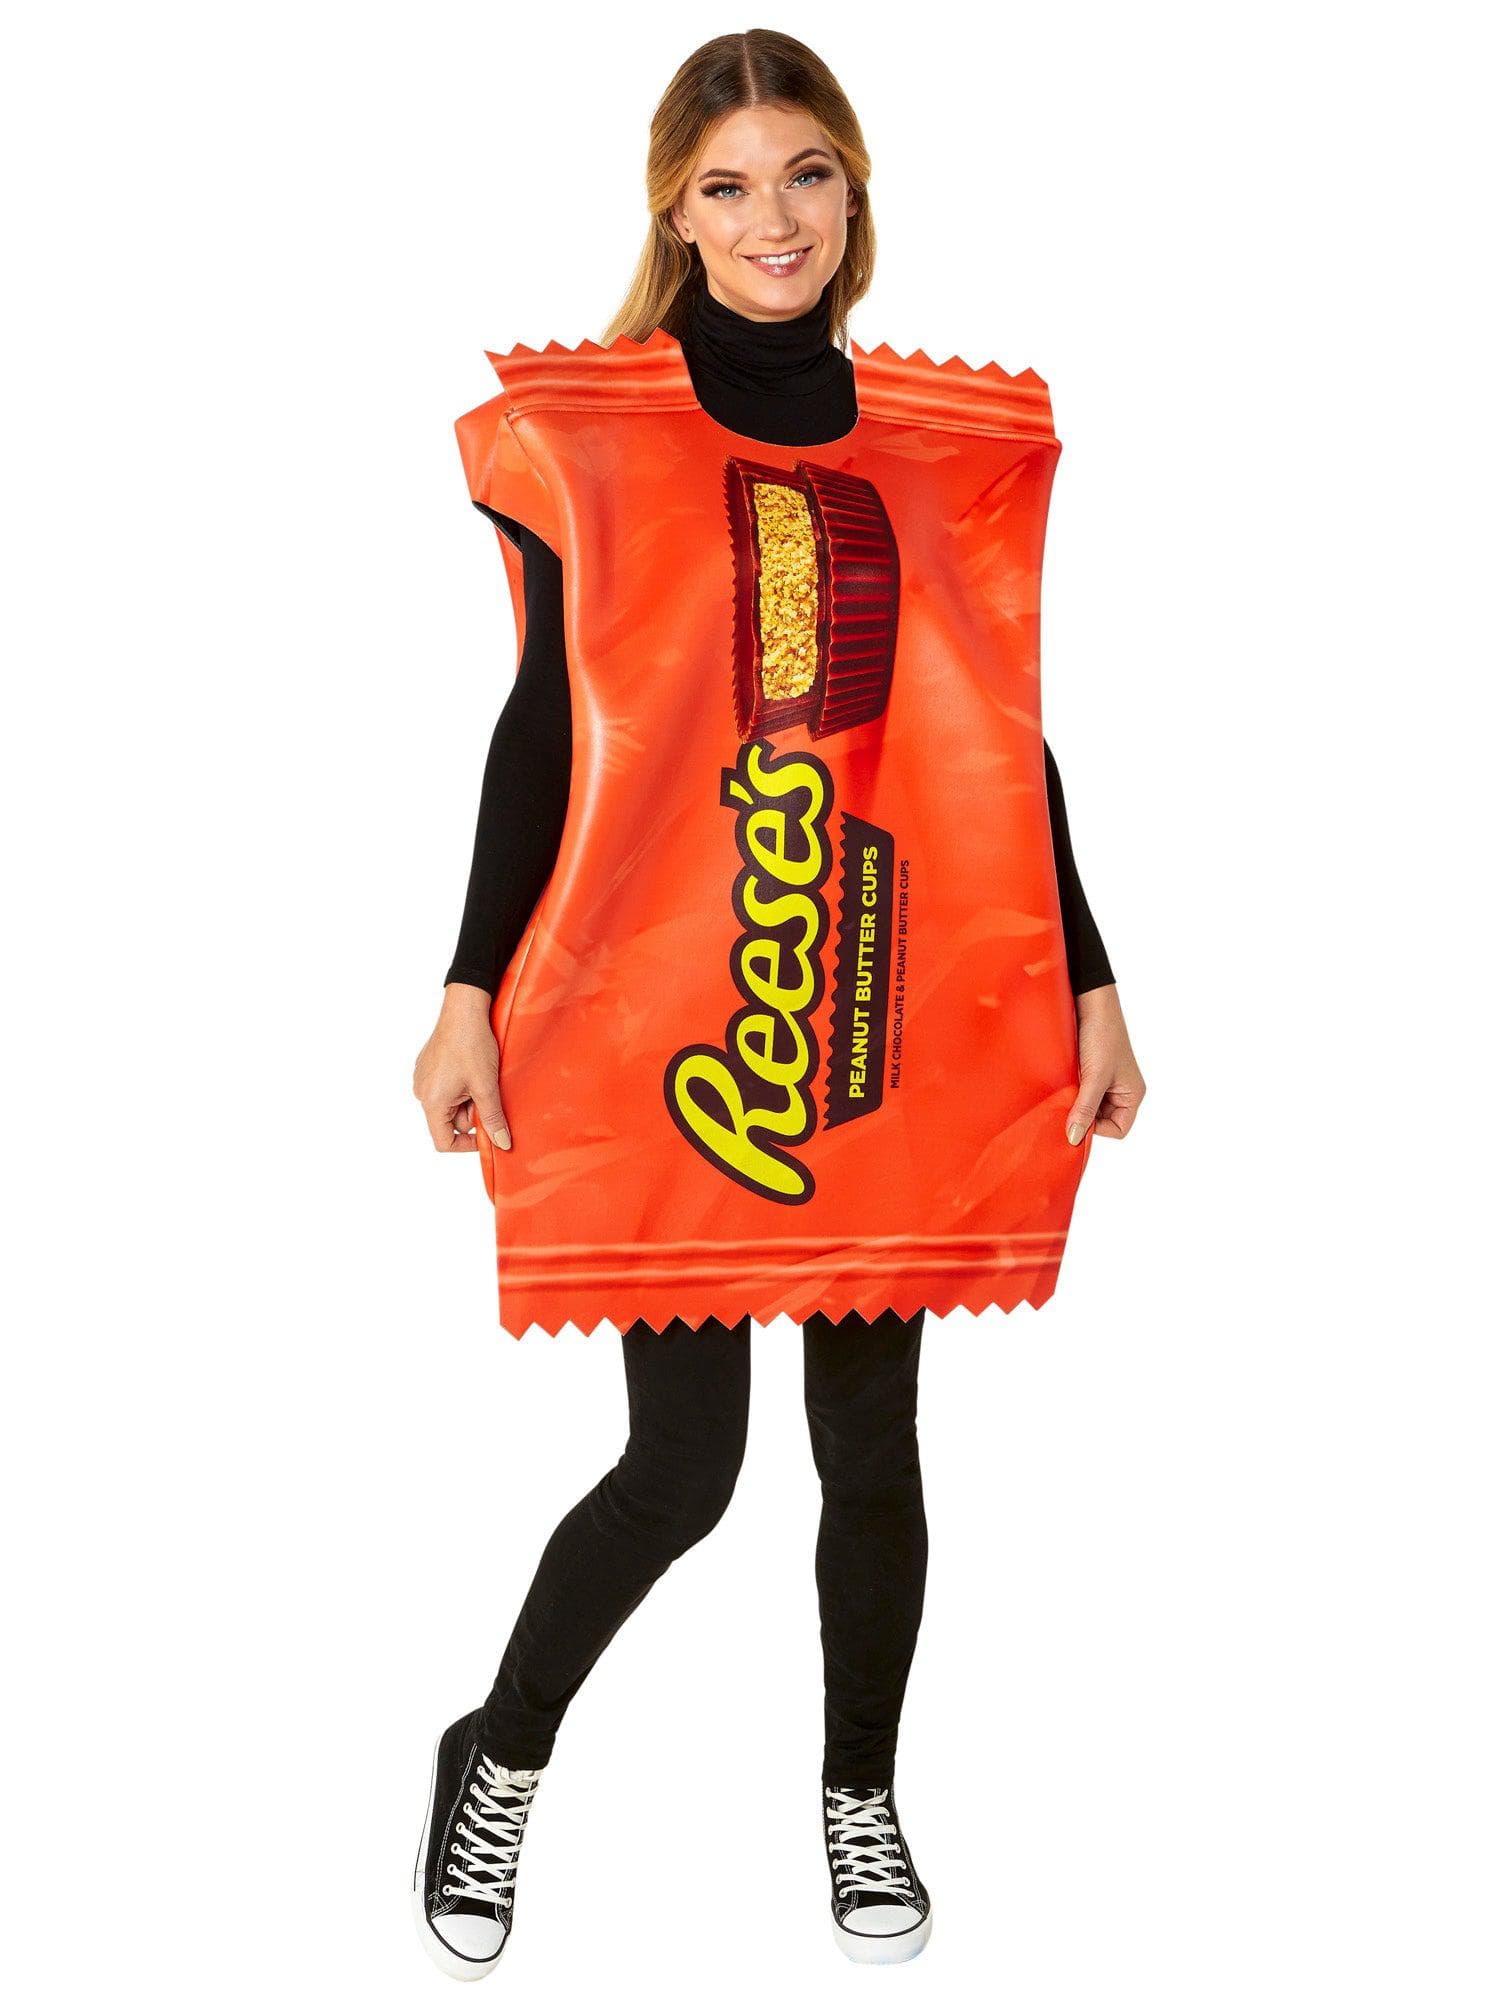 Reese's Peanut Butter Cup Adult Costume - costumes.com